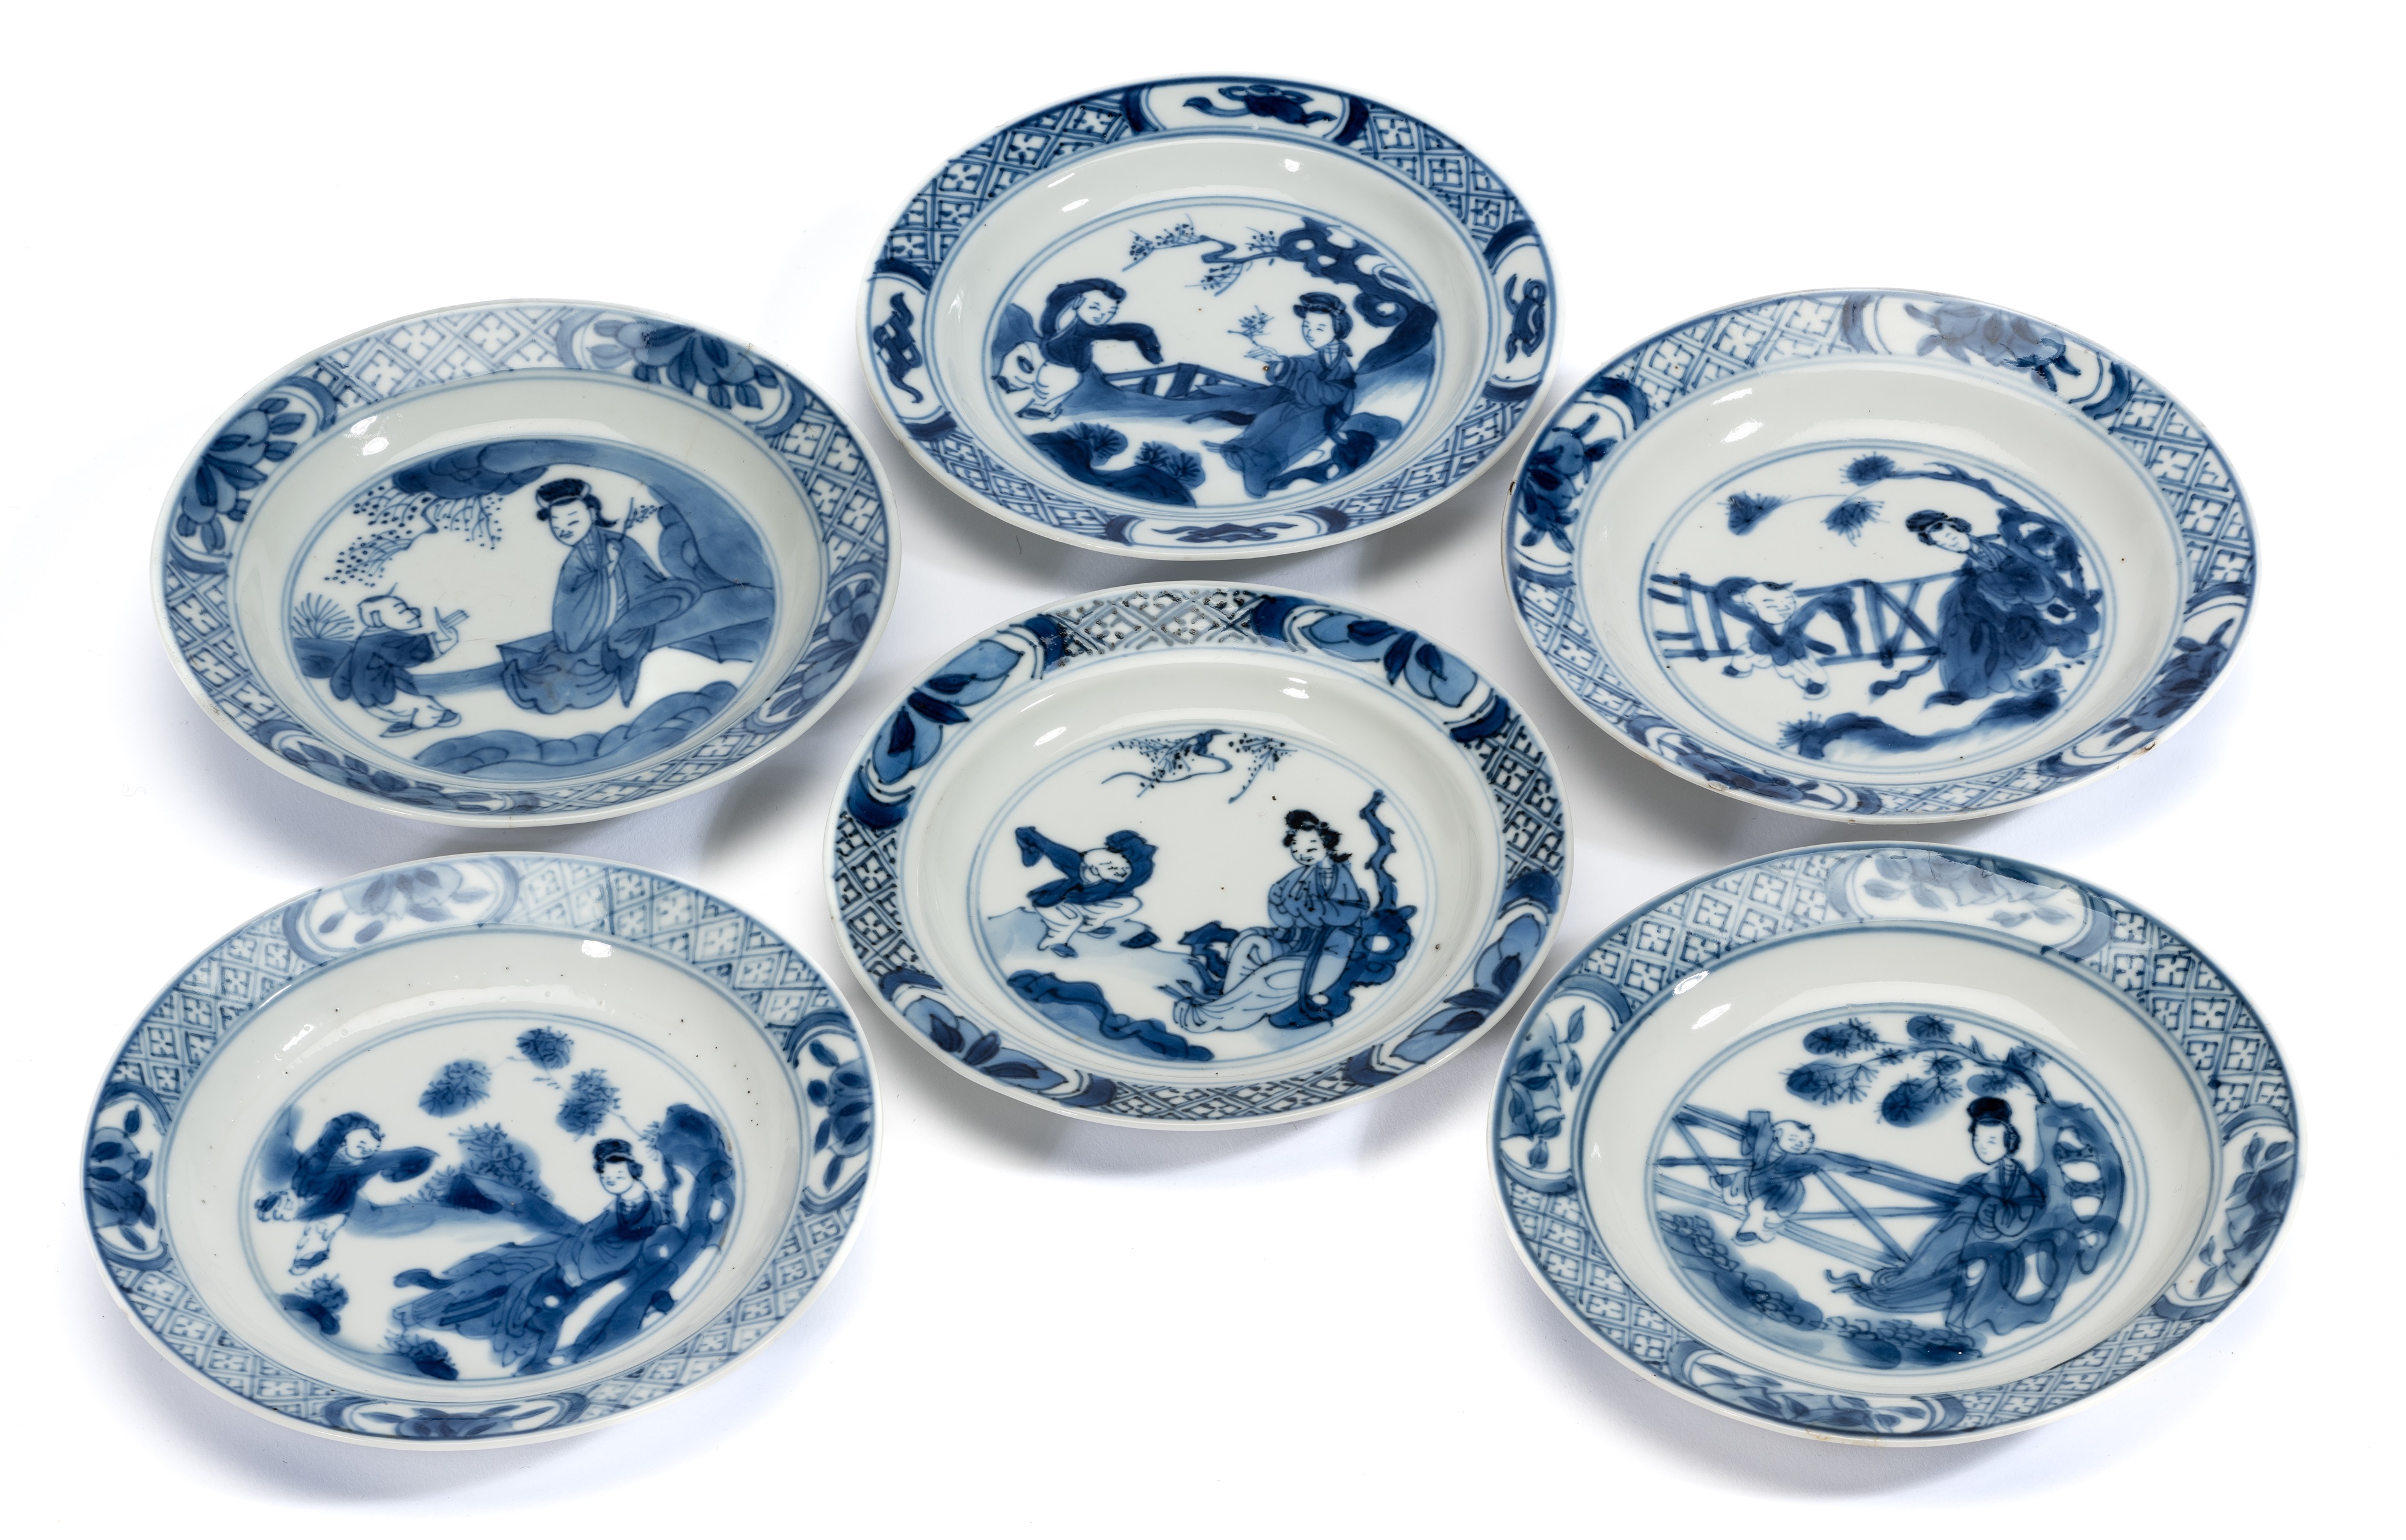 SIX SMALL MATCHED CHINESE BLUE AND WHITE DISHES. QING DYNASTY, KANGXI PERIOD (1662-1722)